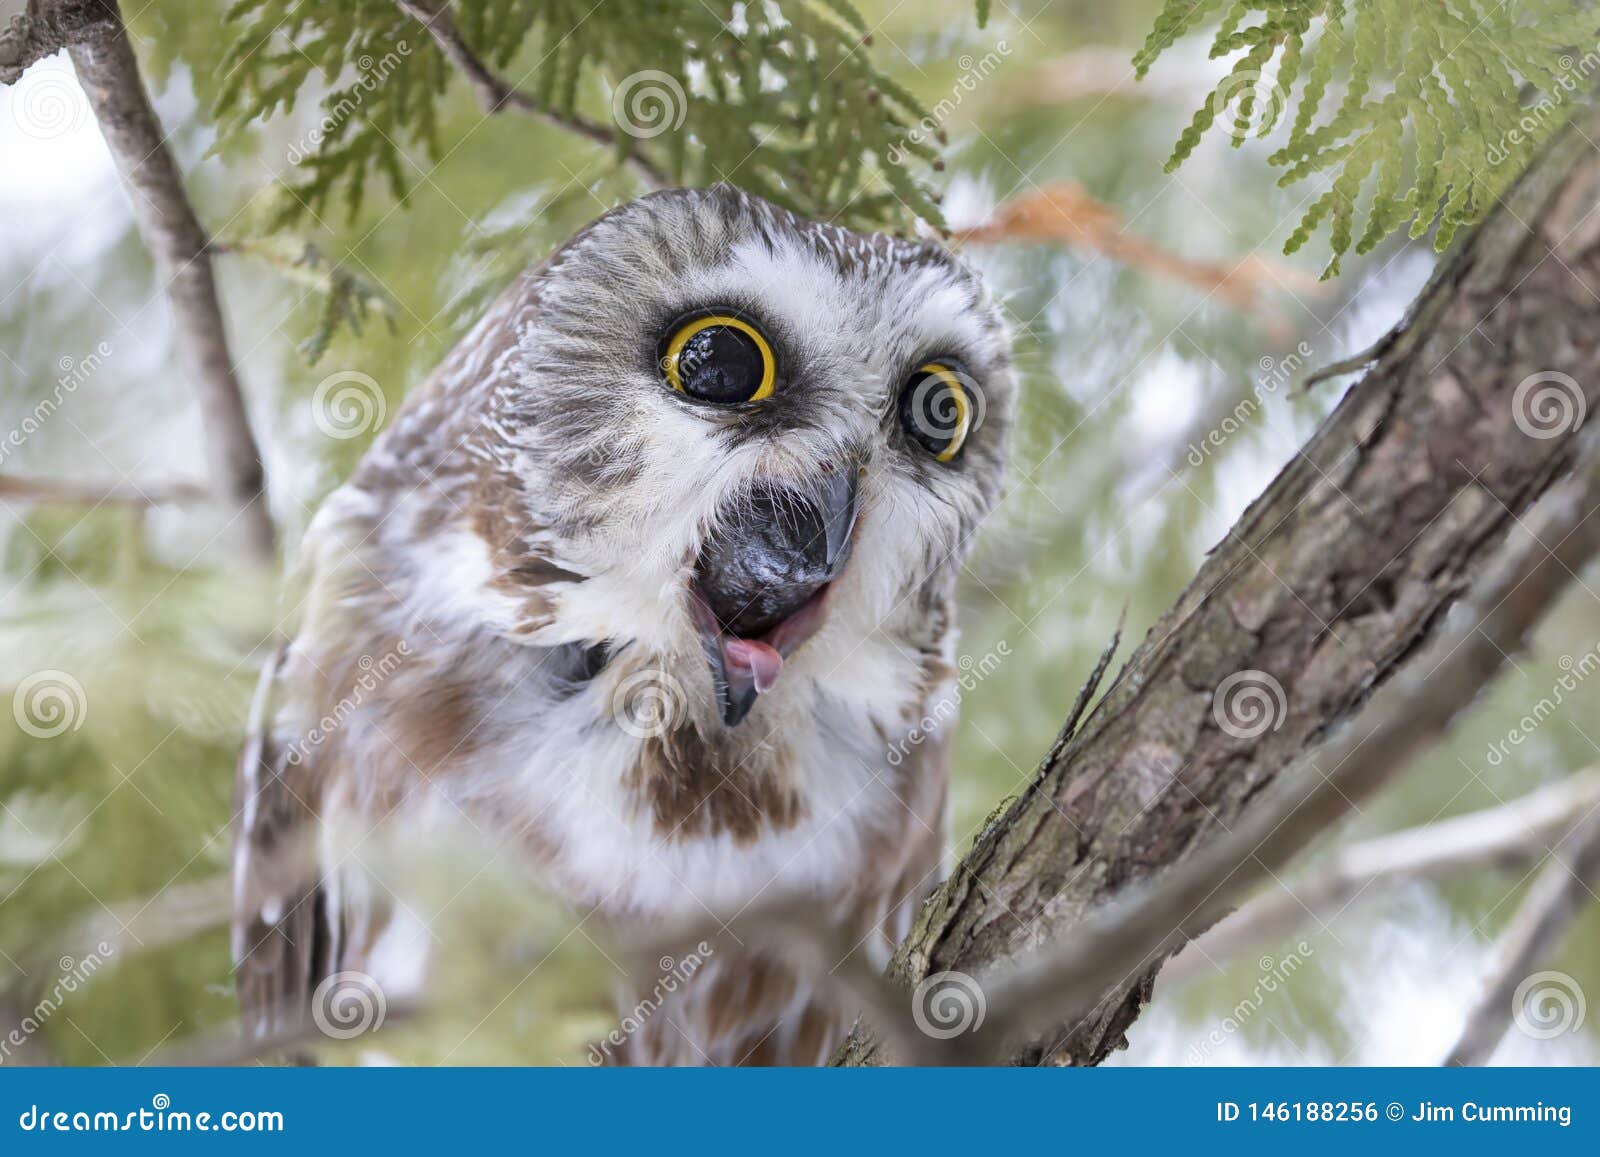 a saw-whet owl coughing up a pellet in a cedar tree in canada